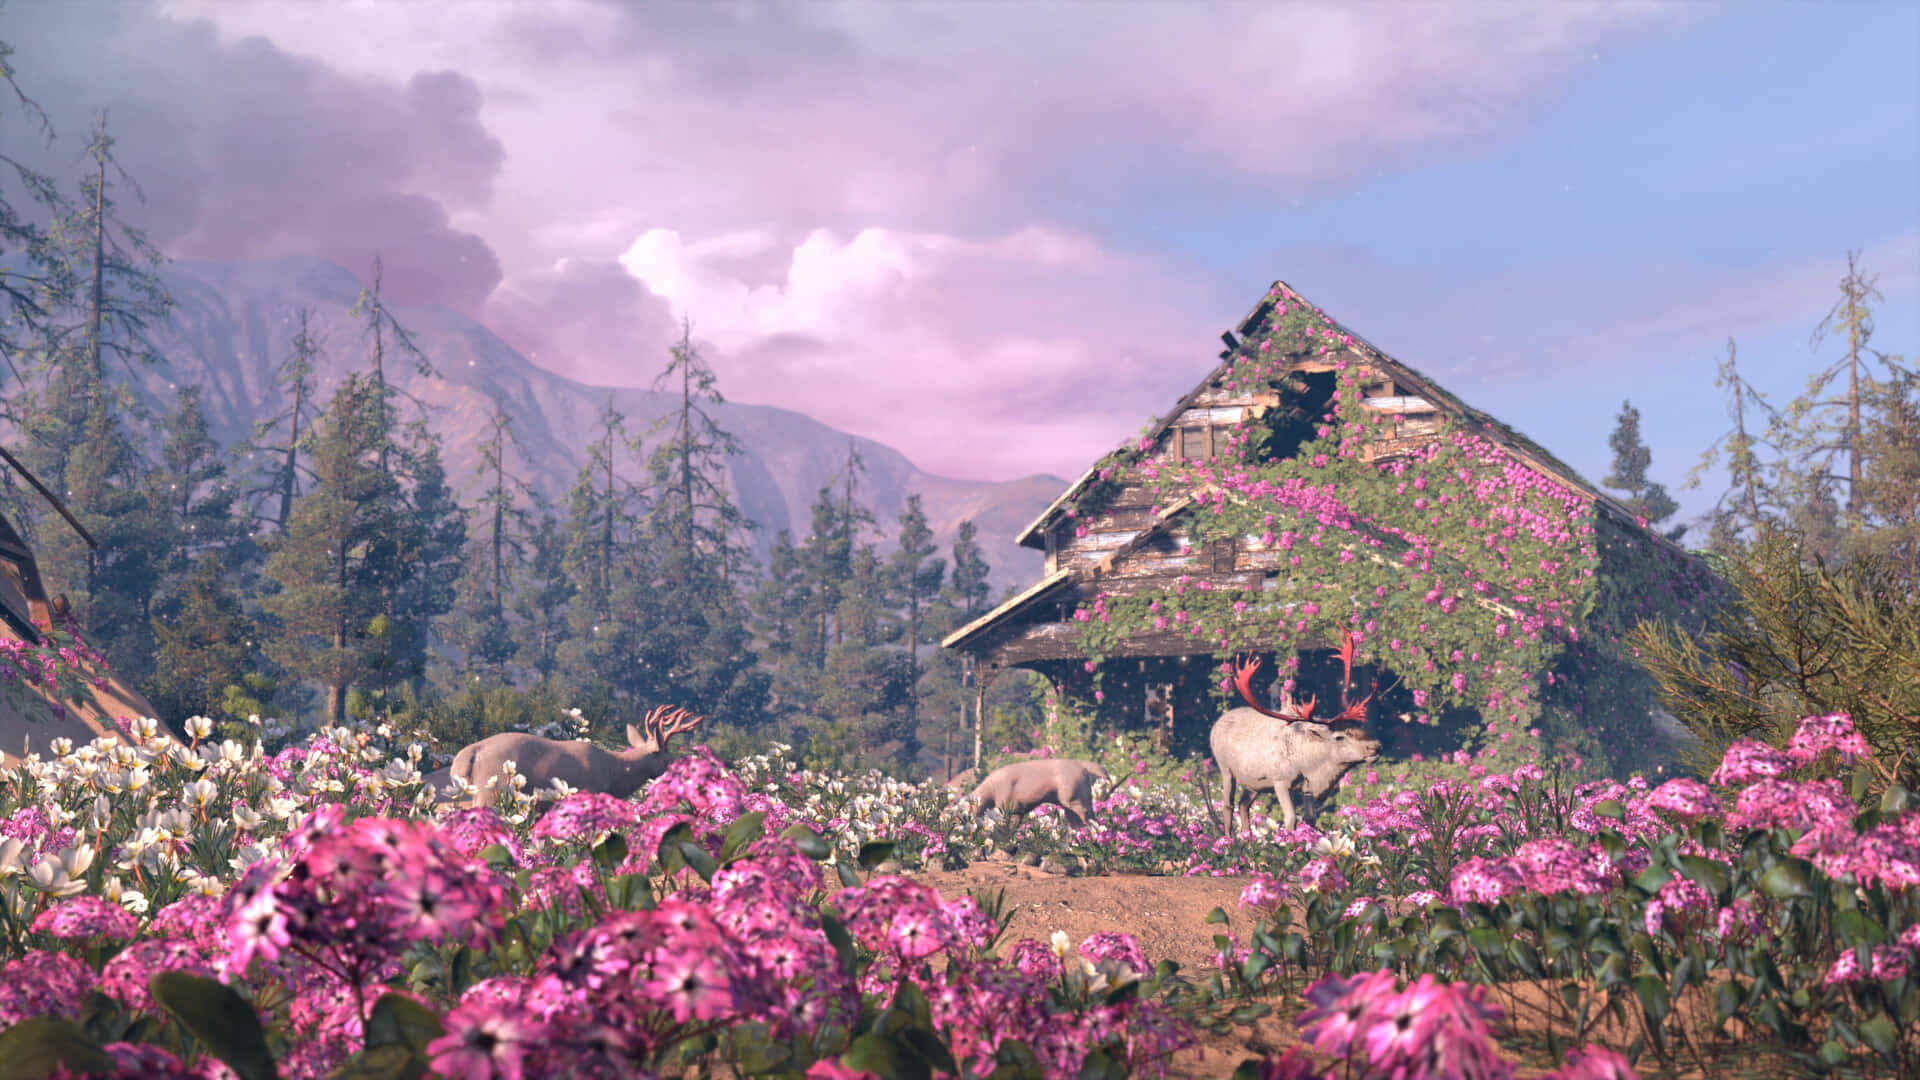 A House With Flowers In The Middle Of A Forest